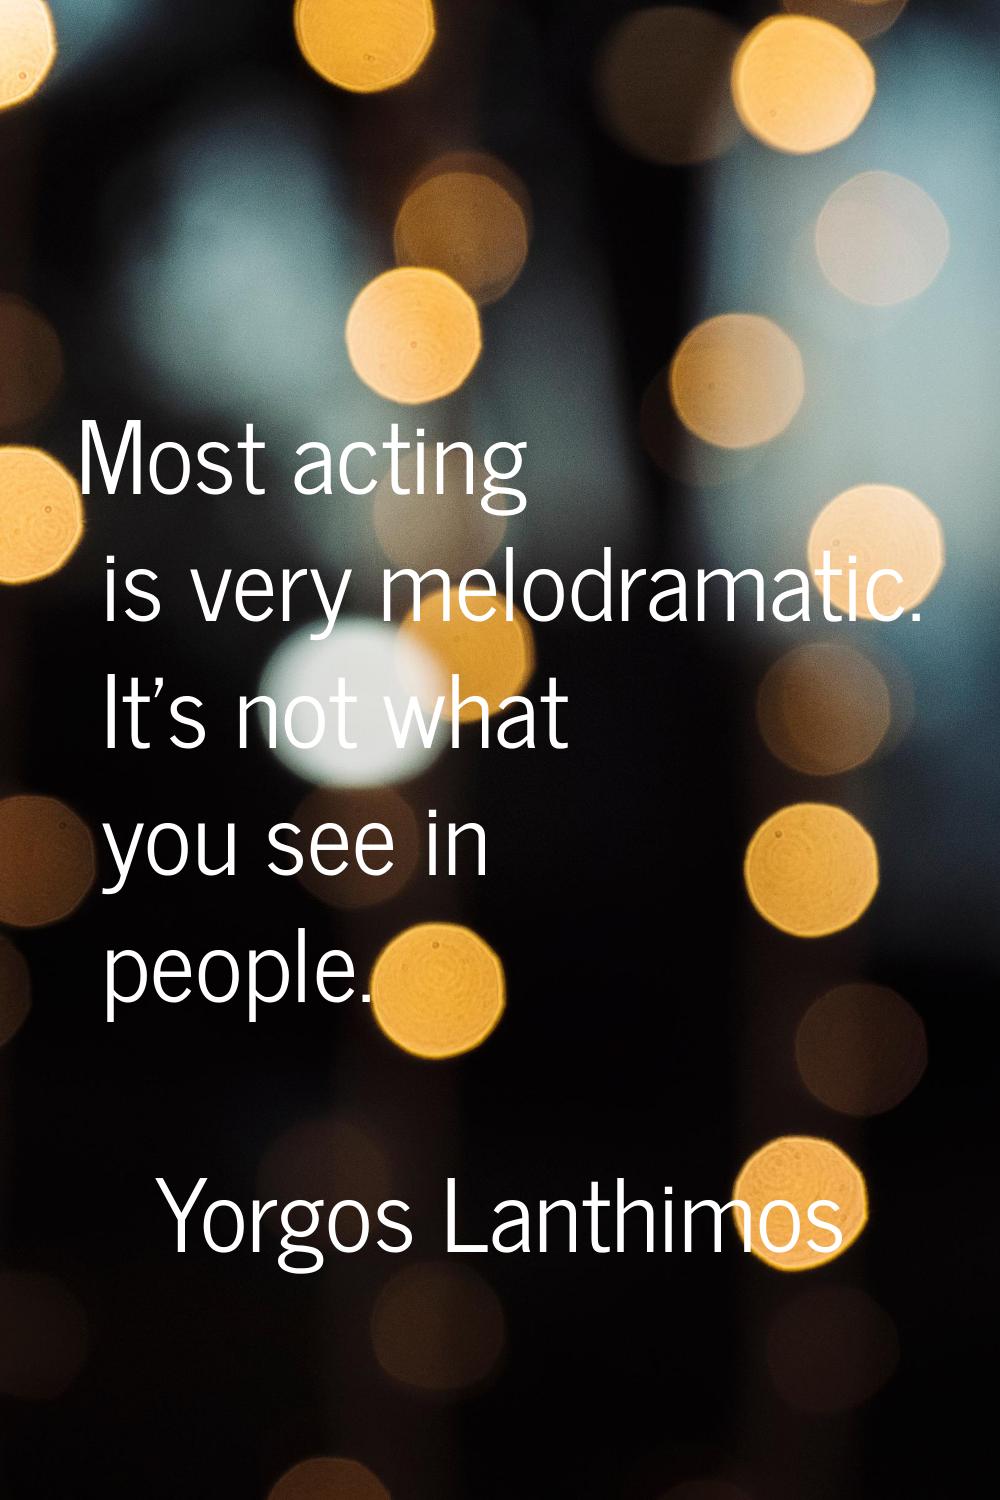 Most acting is very melodramatic. It's not what you see in people.